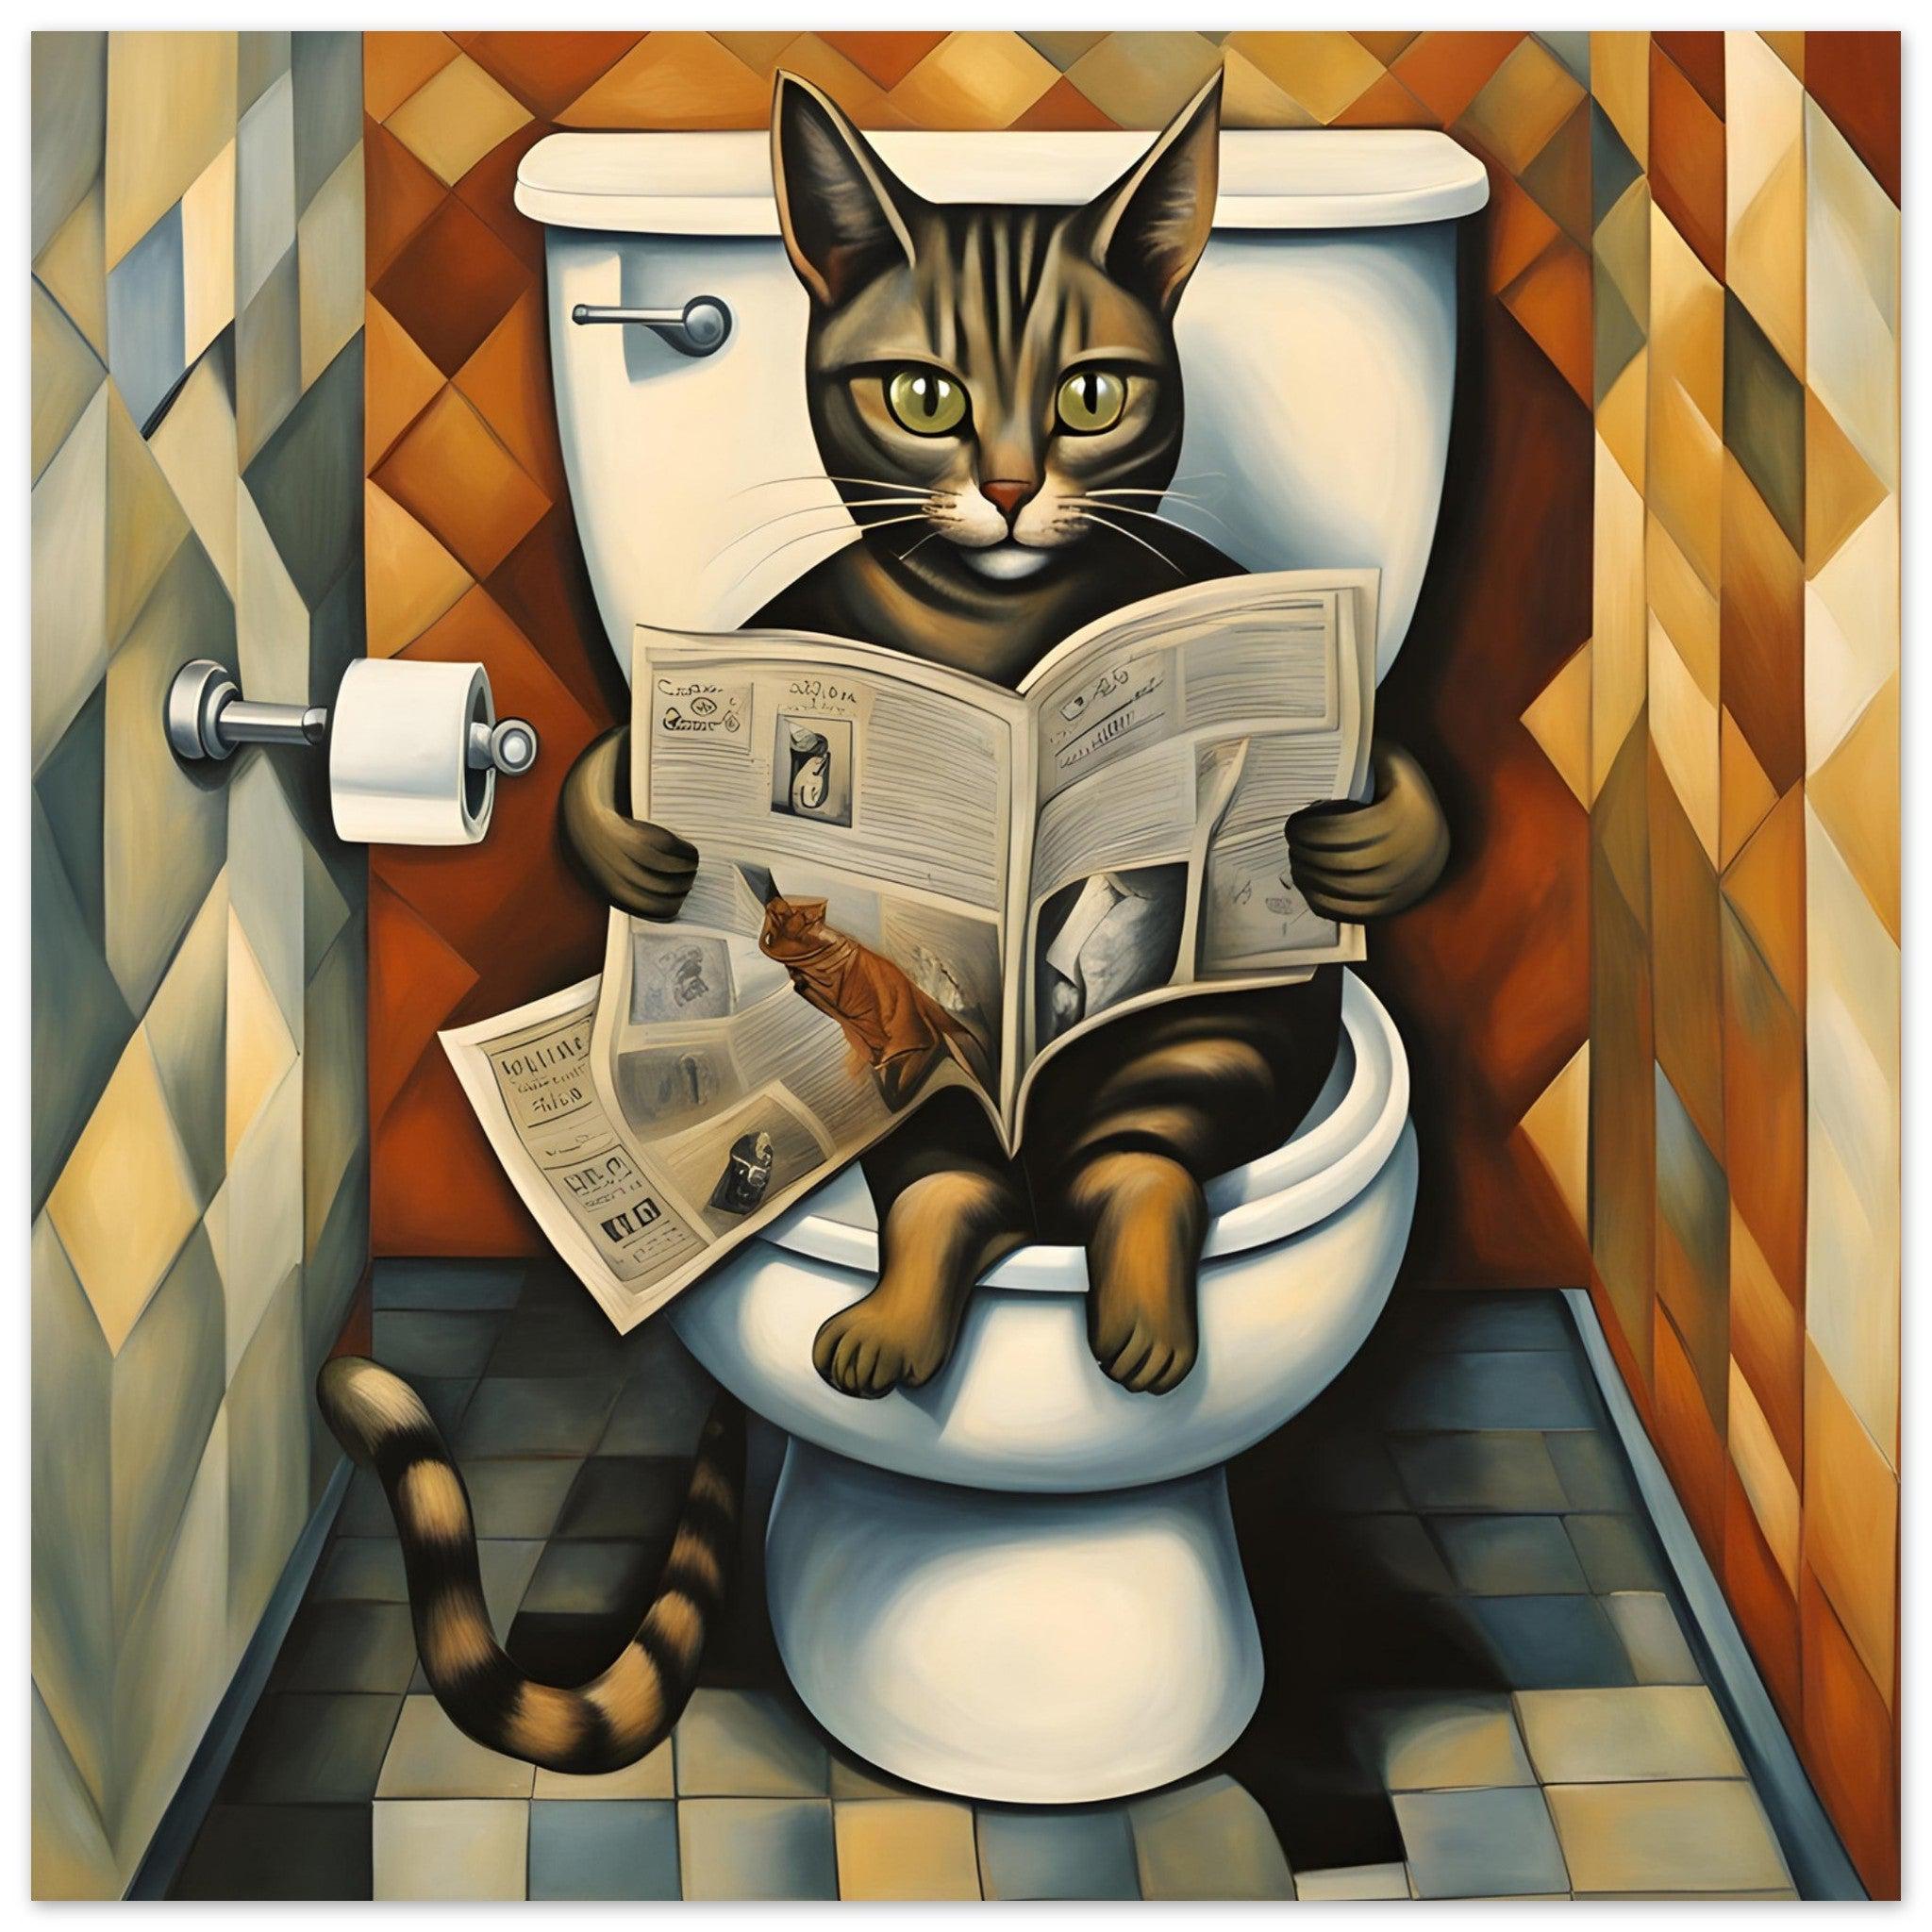 Reflectapix Presents Funny Abstract Art Cat Sitting On The Toilet - funny home decor, large abstract wall art, abstract art prints, abstract artwork, wall murals, wall prints, room decor, artwork prints, wall artwork, art to print, art on wall